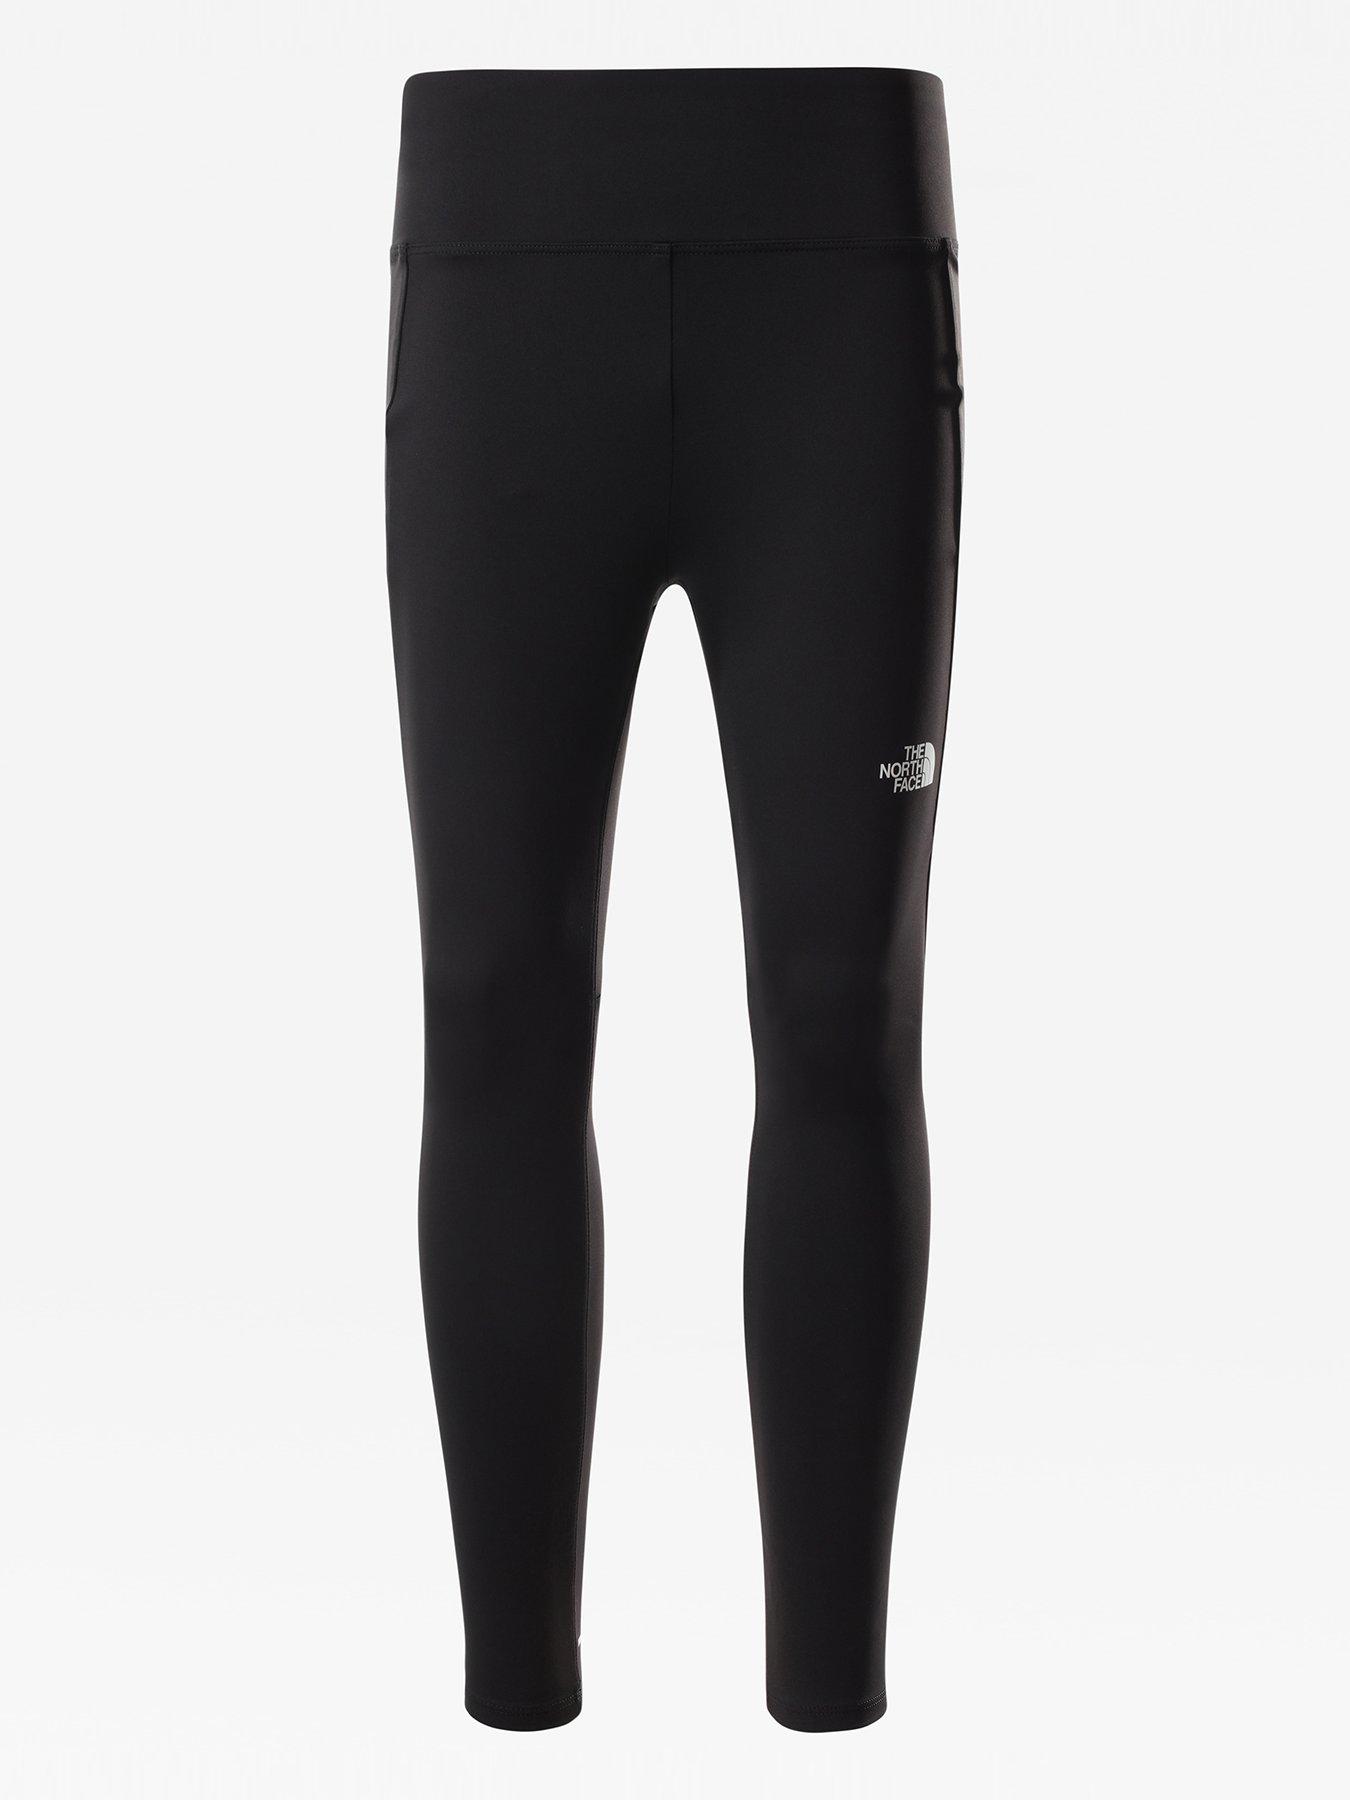  The North Face Youth Girl's On Mountain Tights